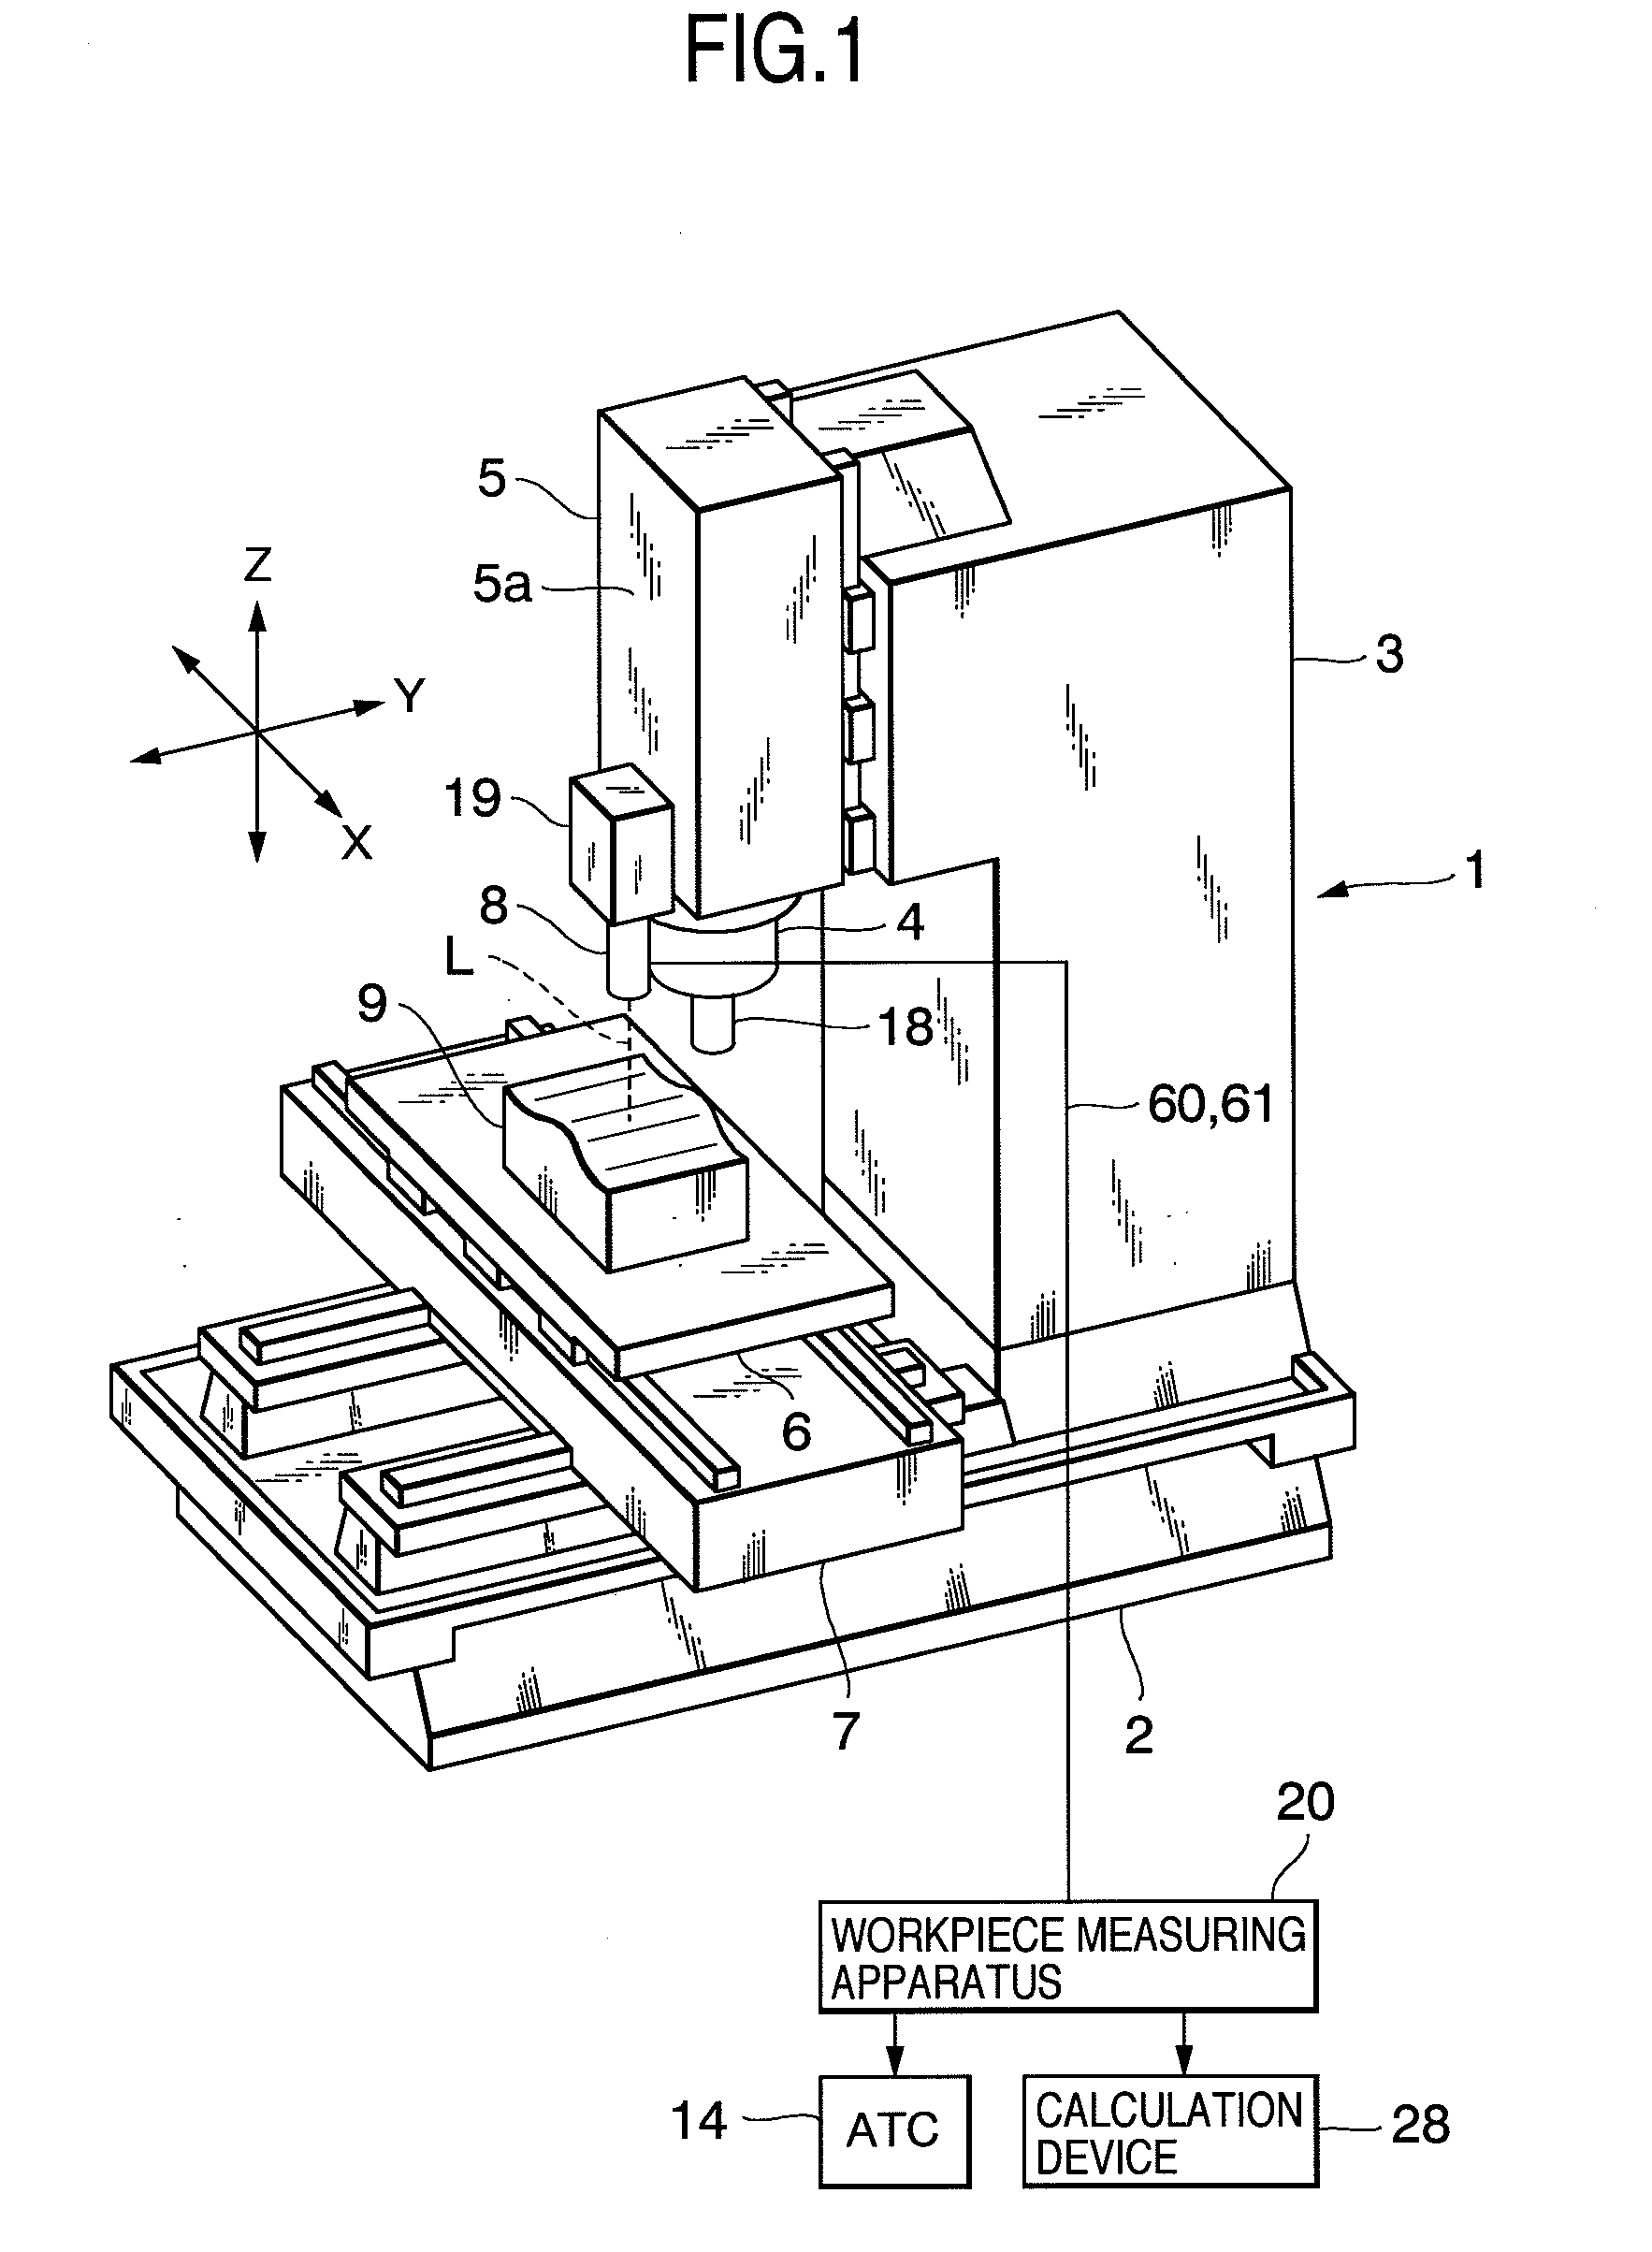 Apparatus for and method of measuring workpiece on machine tool